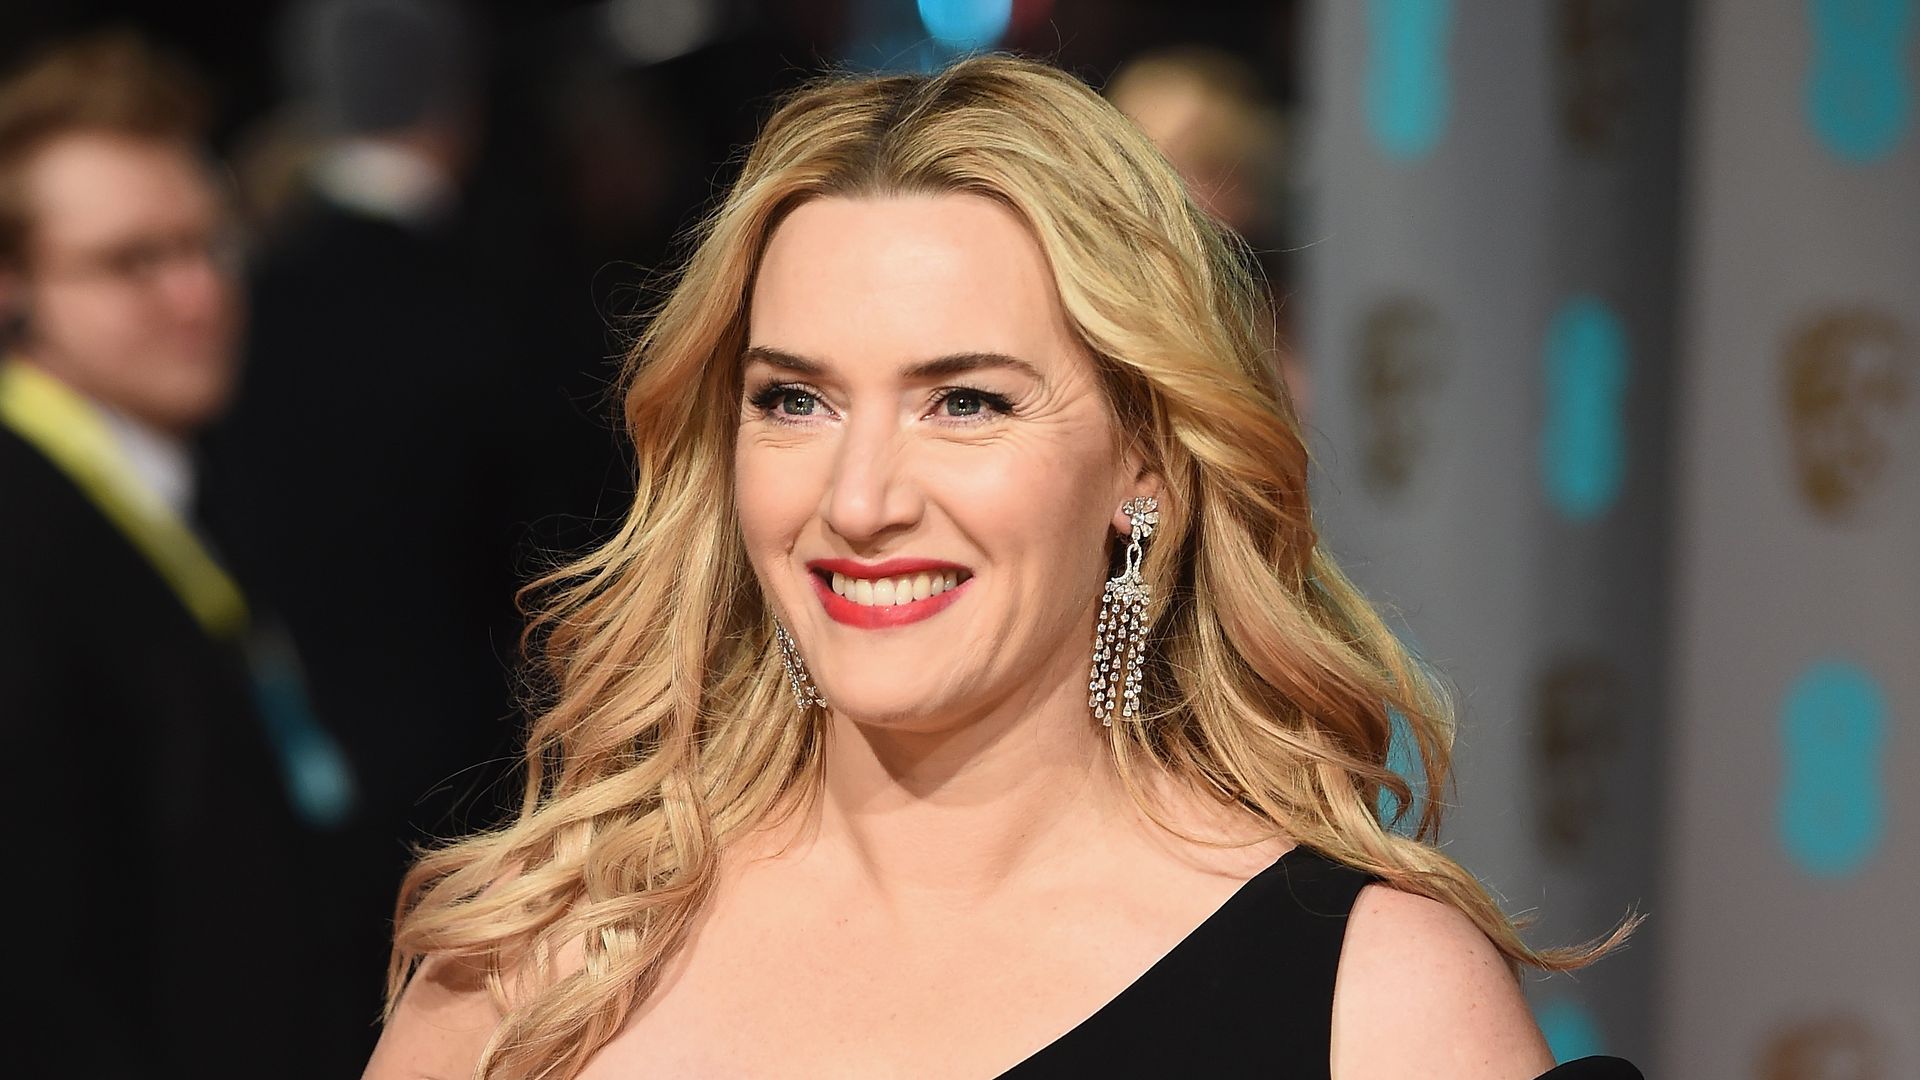 Kate Winslet attends the EE British Academy Film Awards at the Royal Opera House on February 14, 2016 in London, England.